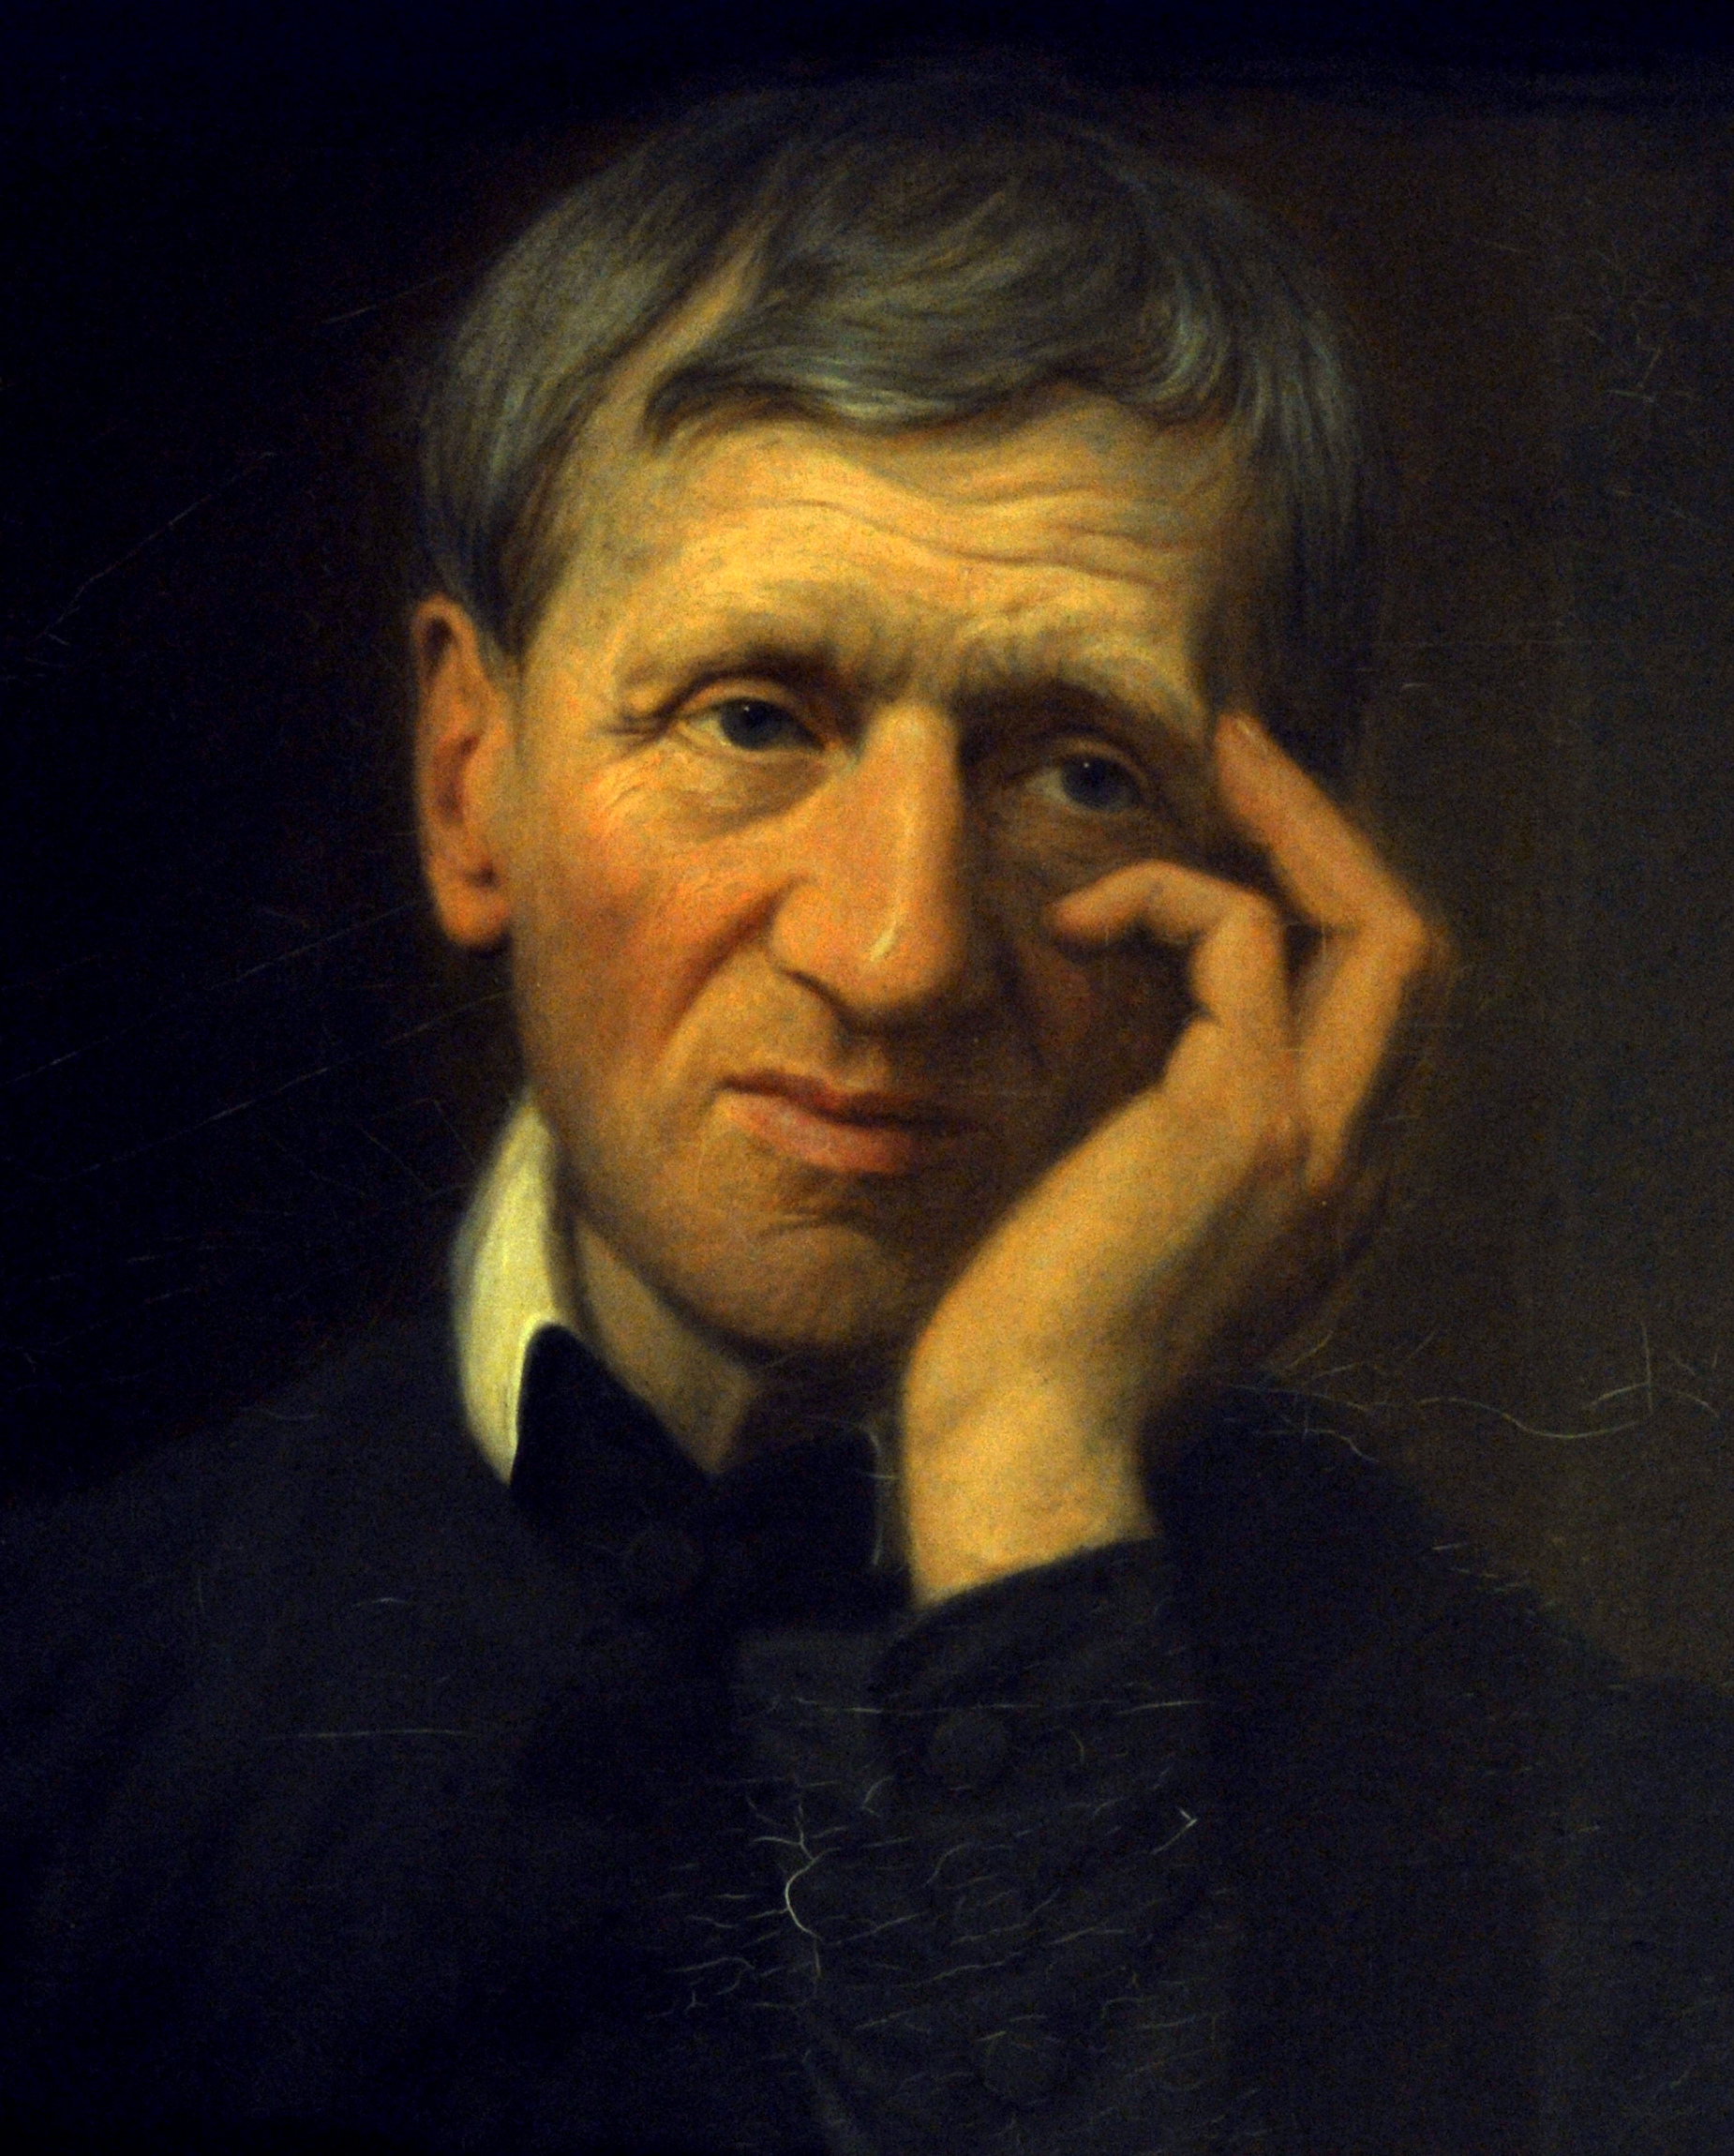 Letters to Blessed John Henry Newman show his role as pastor, evangelist